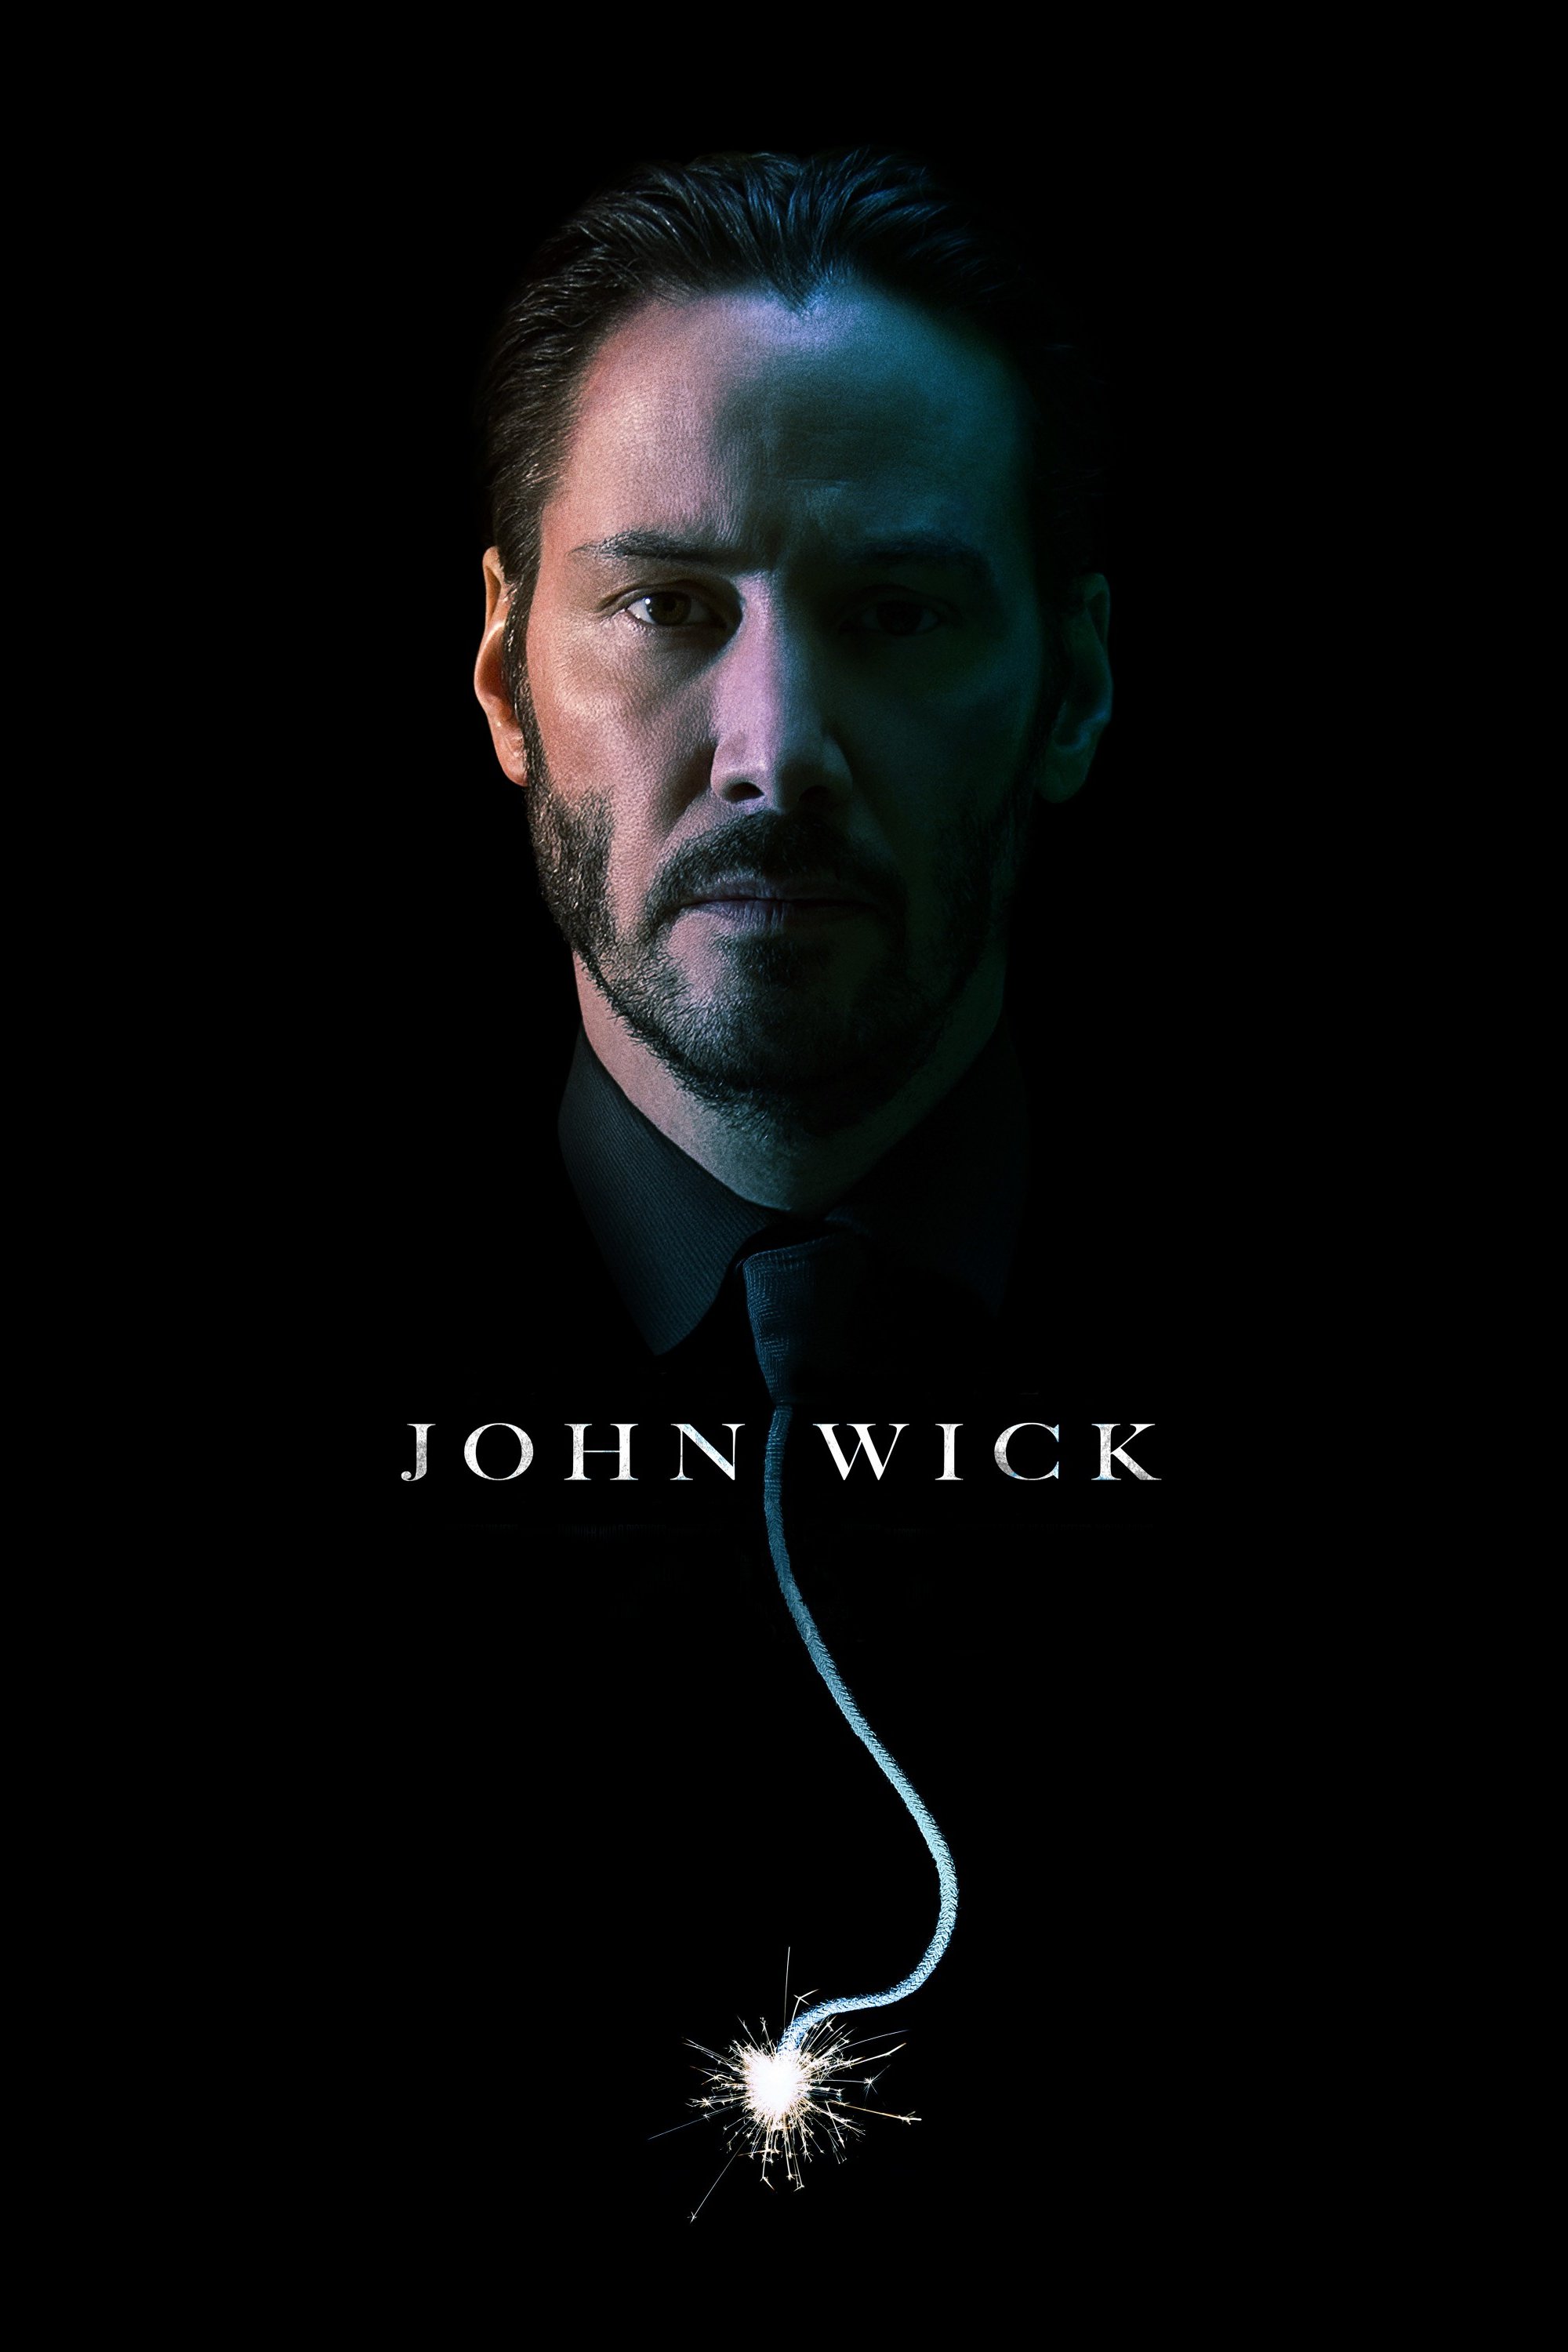 Poster for the movie "John Wick"